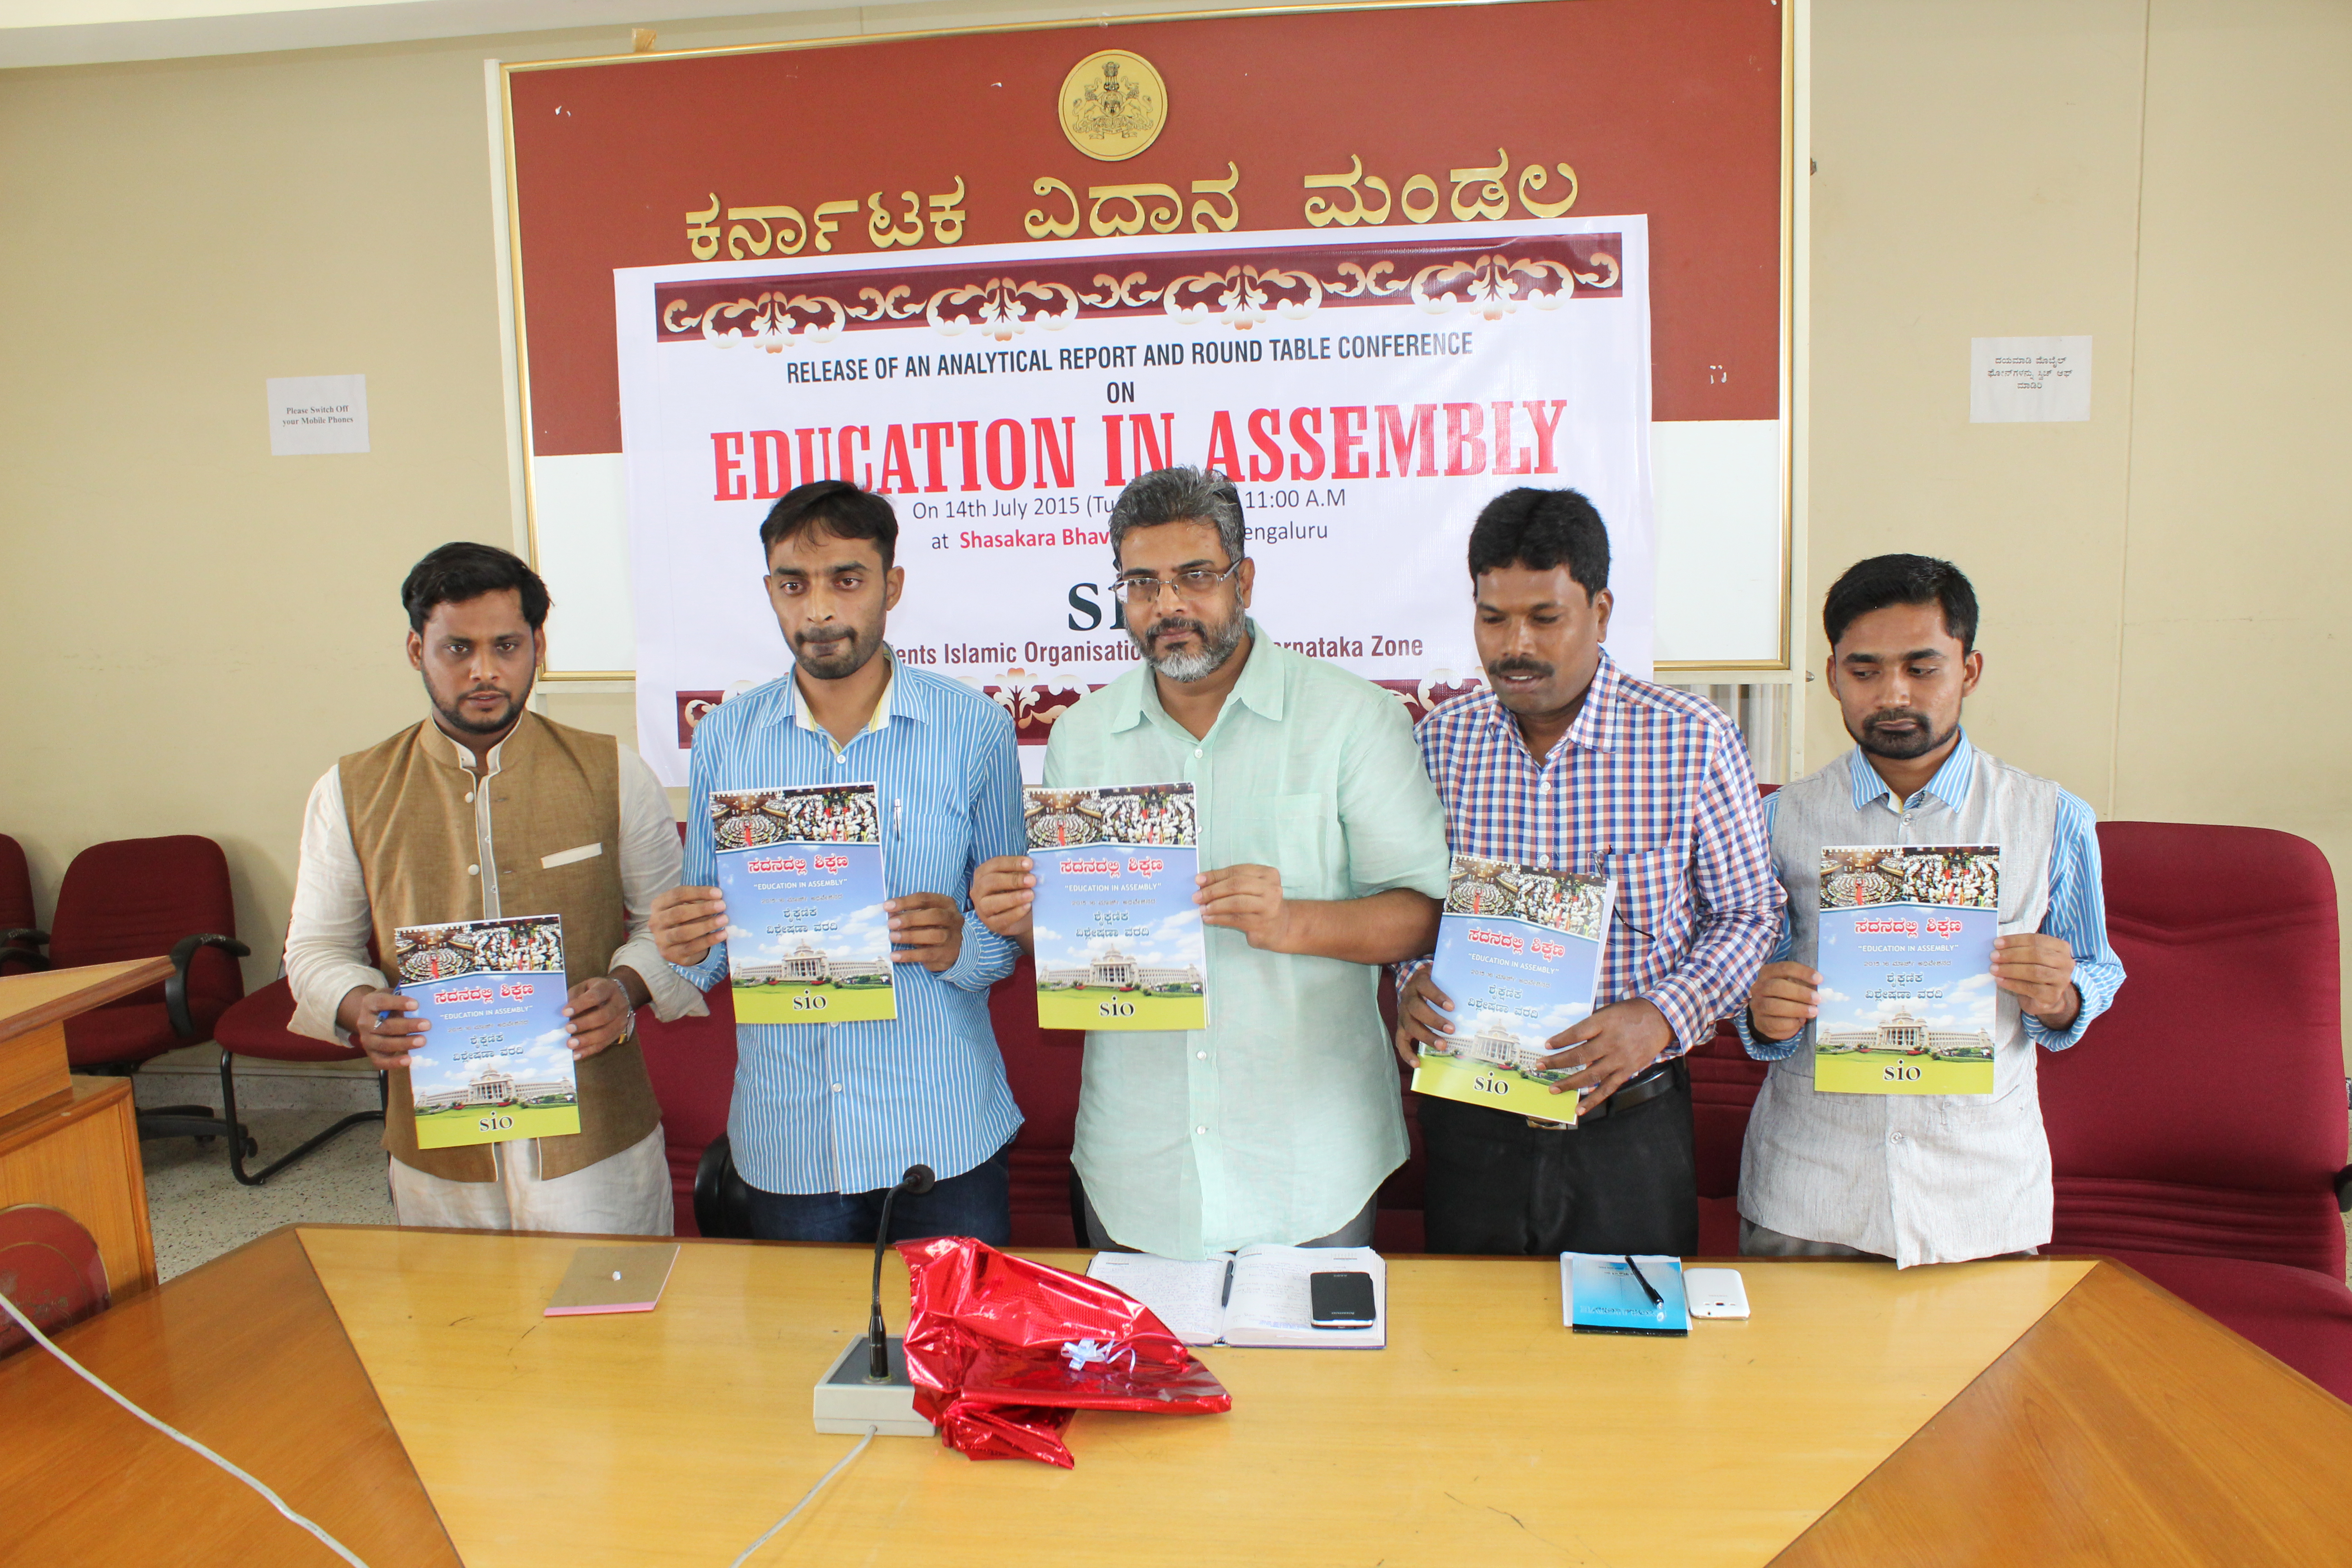 SIO Karnataka released analytical report on “Education in Assembly”